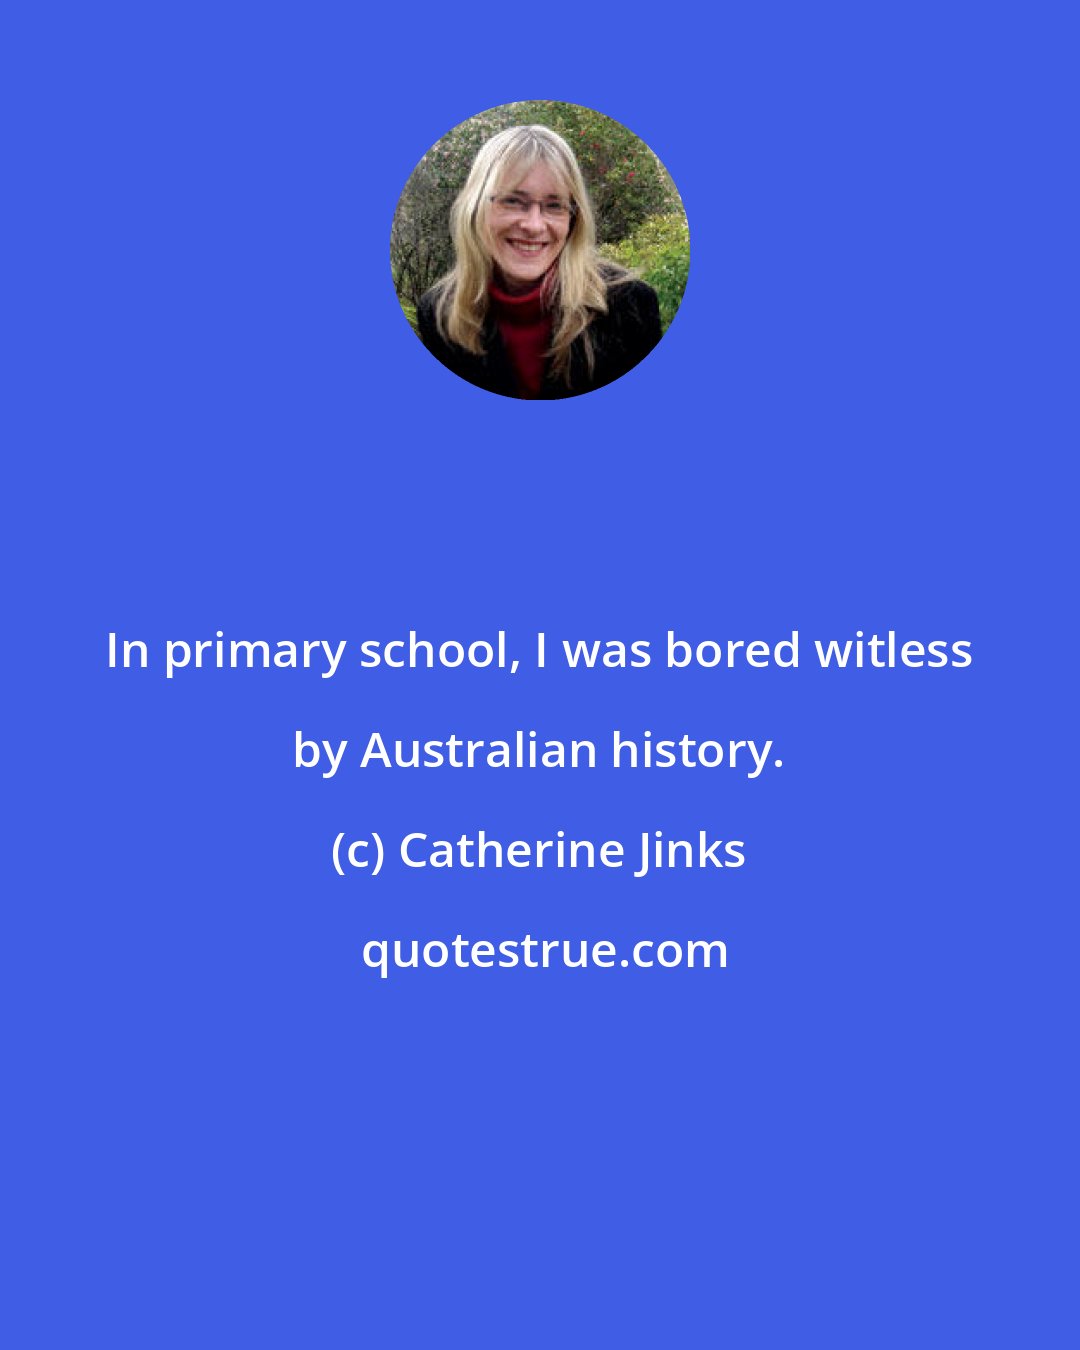 Catherine Jinks: In primary school, I was bored witless by Australian history.